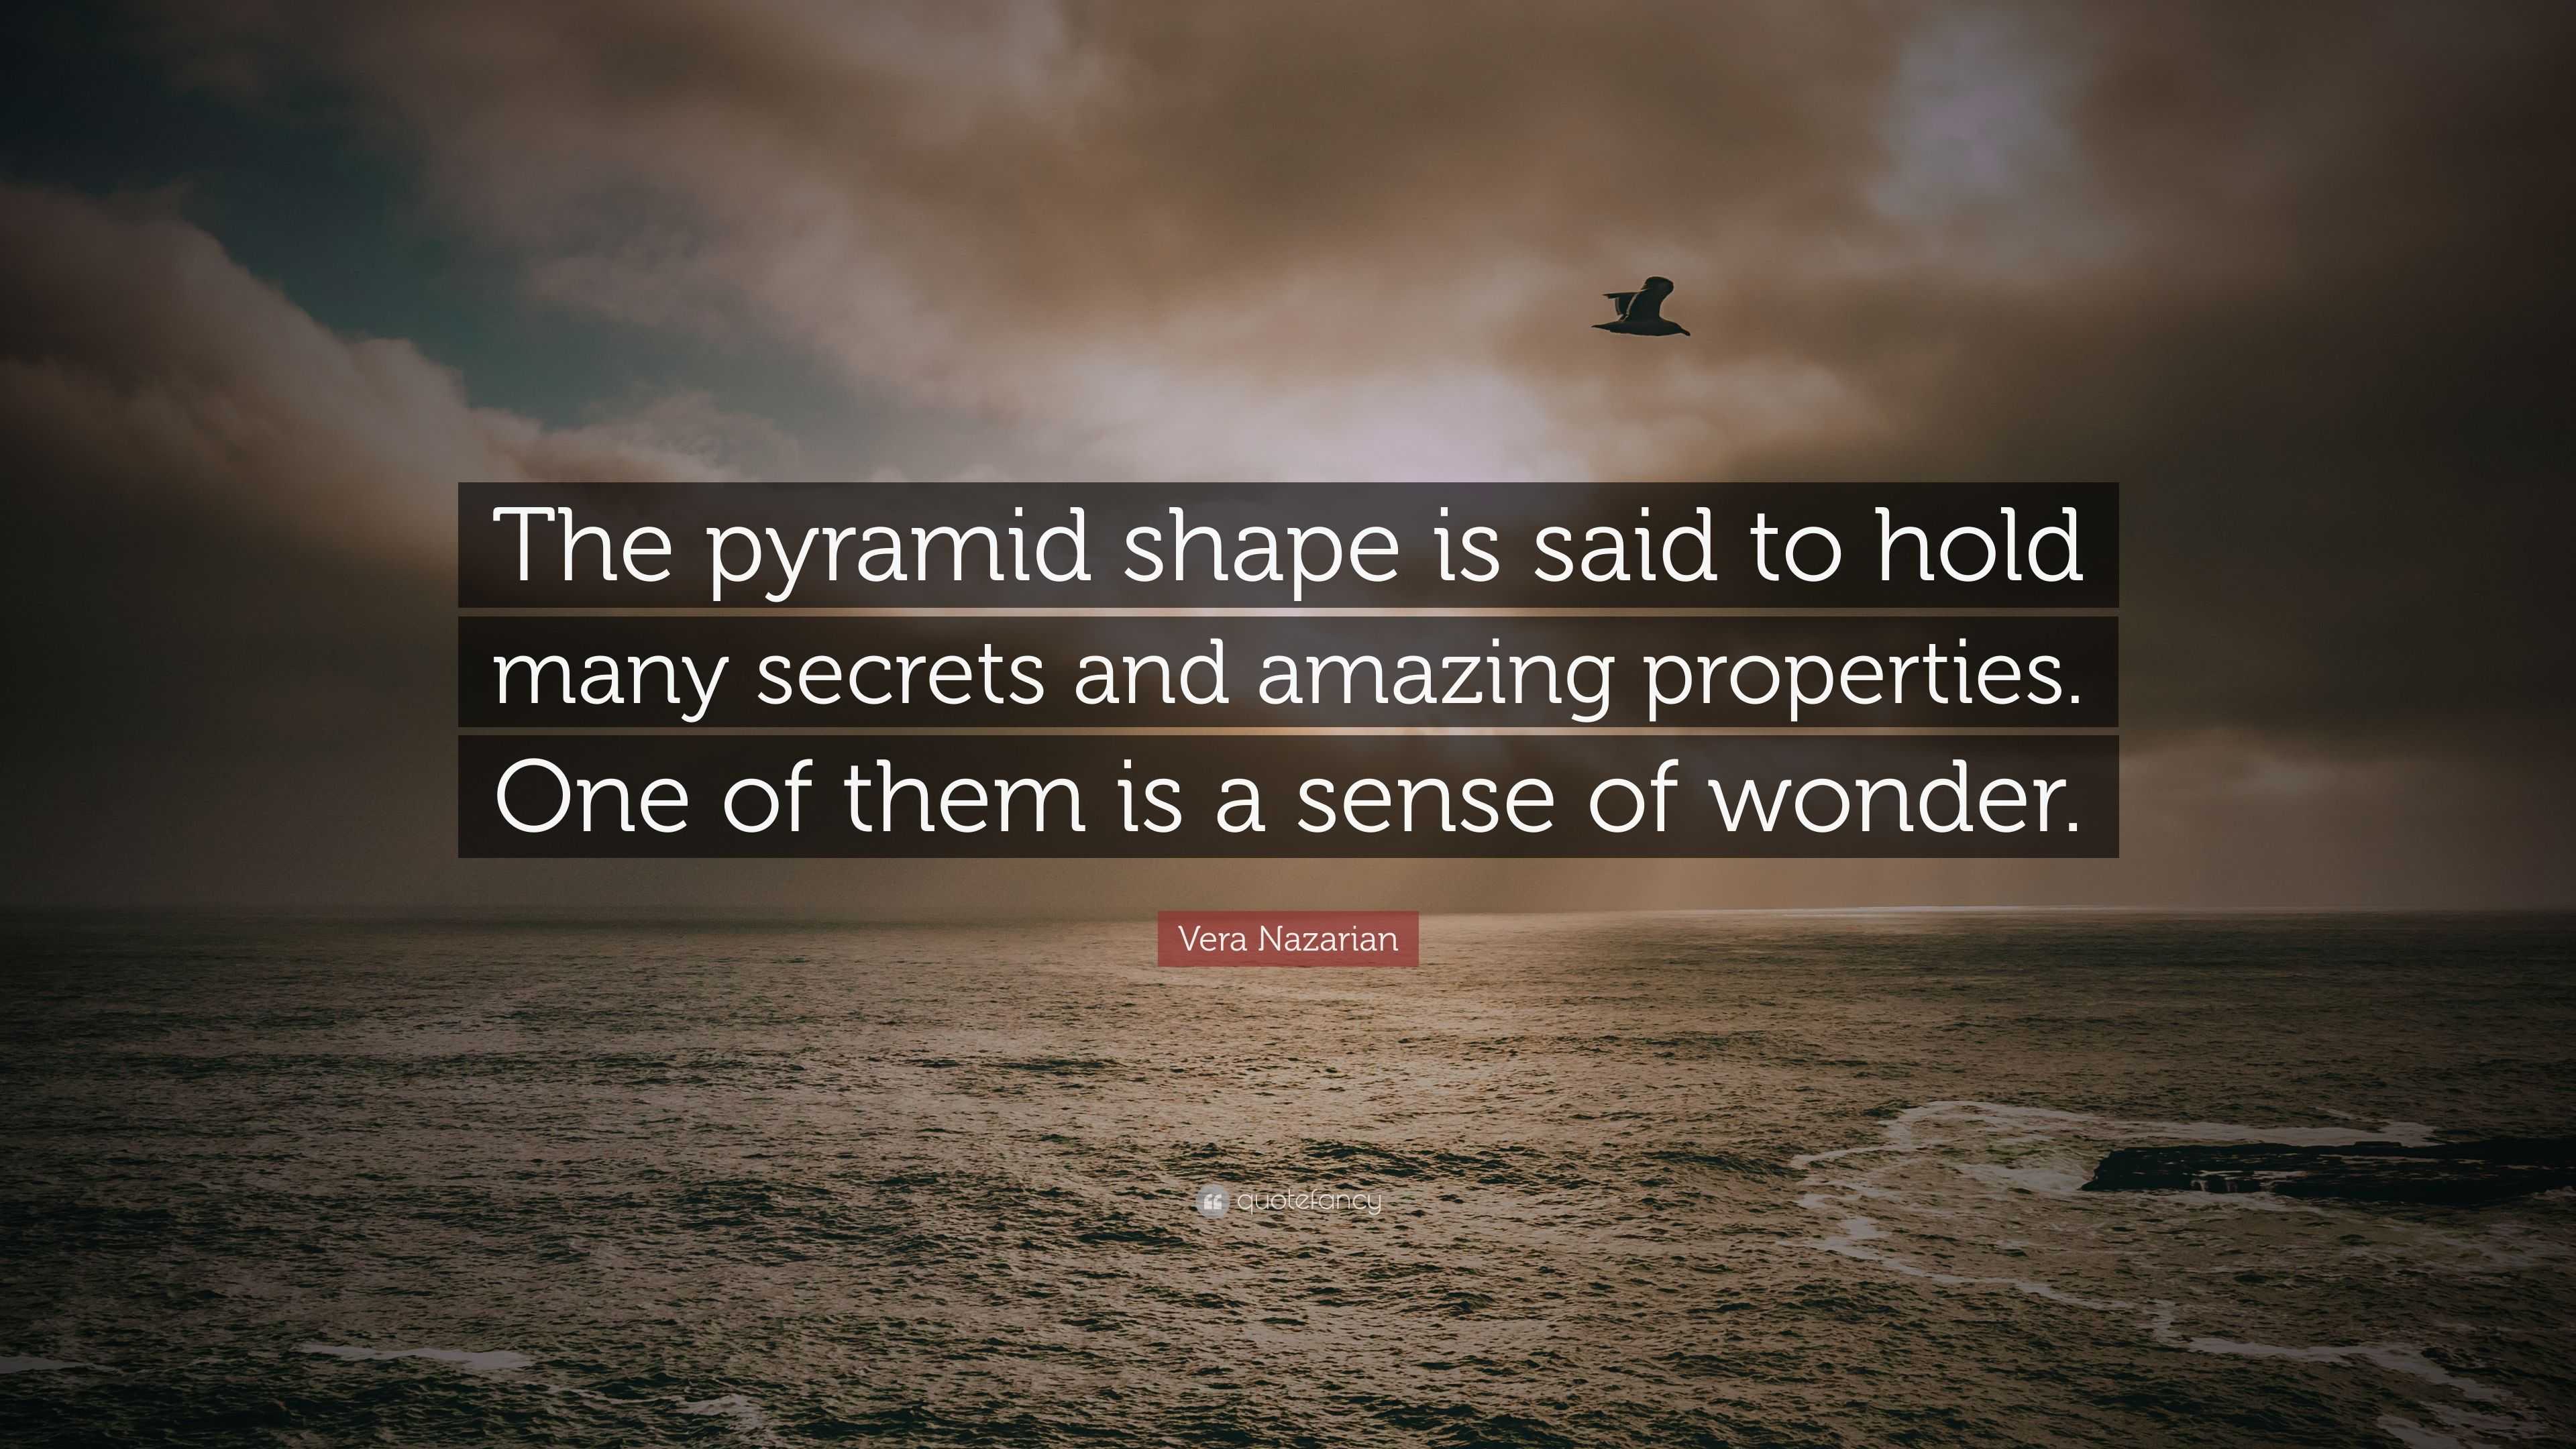 https://quotefancy.com/media/wallpaper/3840x2160/5894140-Vera-Nazarian-Quote-The-pyramid-shape-is-said-to-hold-many-secrets.jpg